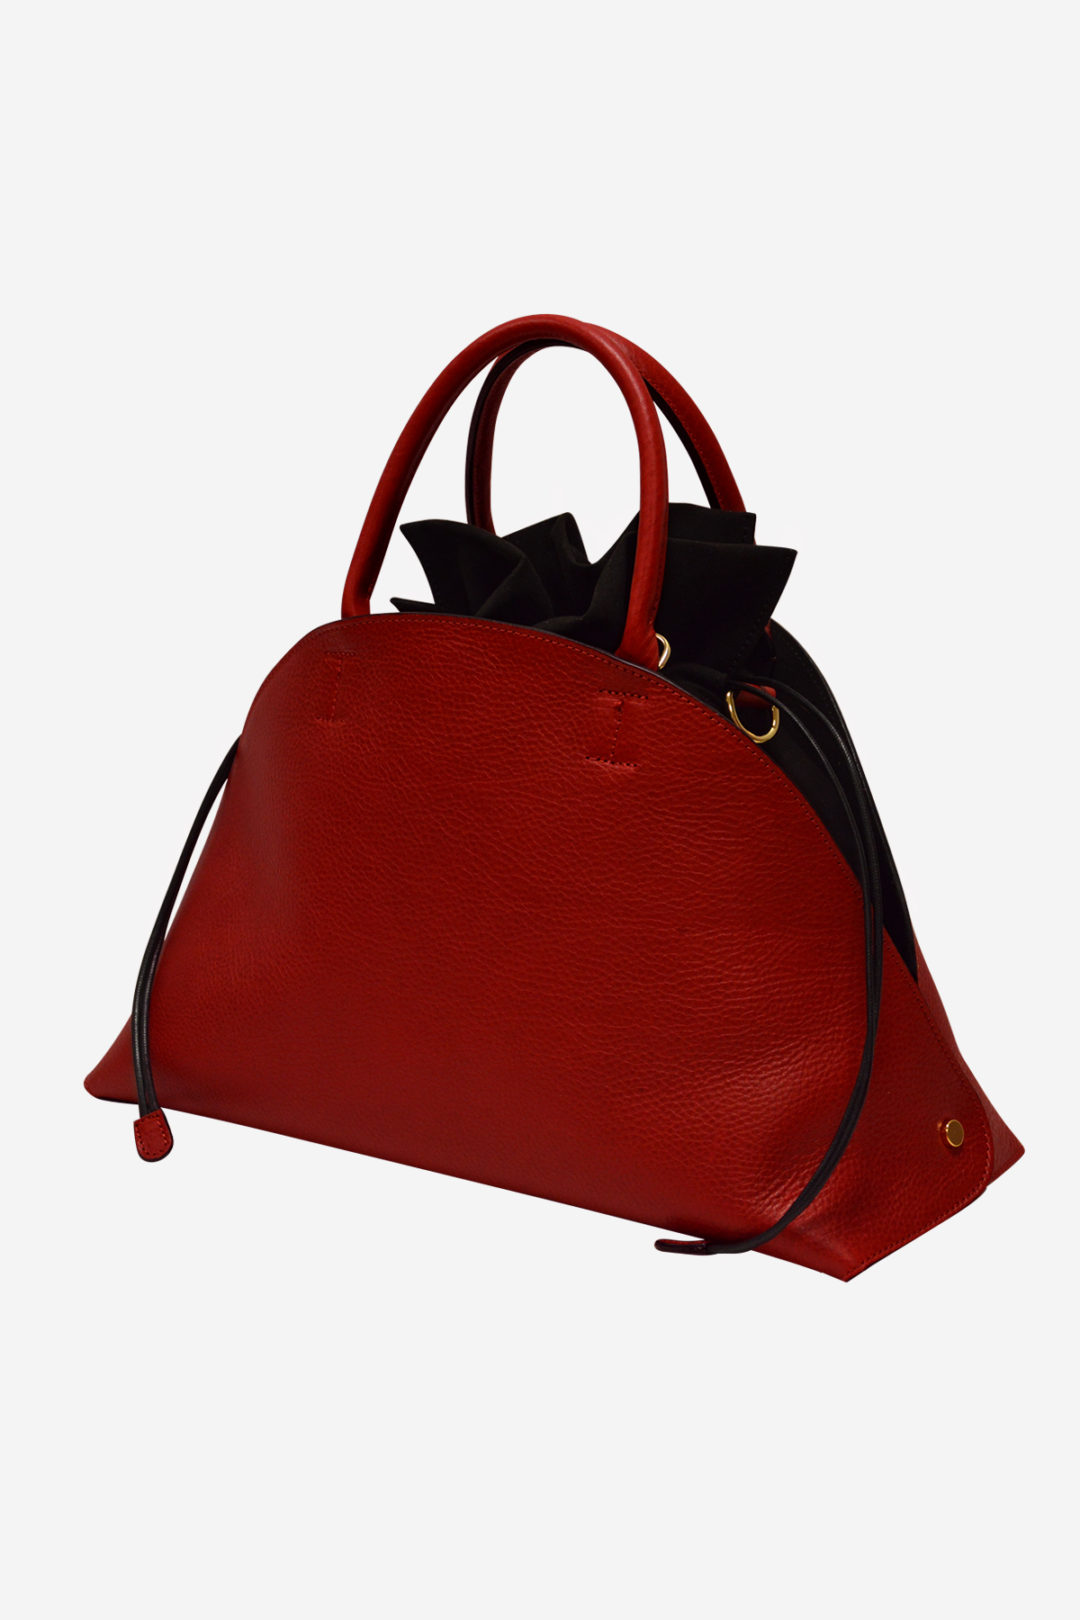 Major Hemispheric Handbag handmade in italy vegetable tanned leather made in italy two bags in one